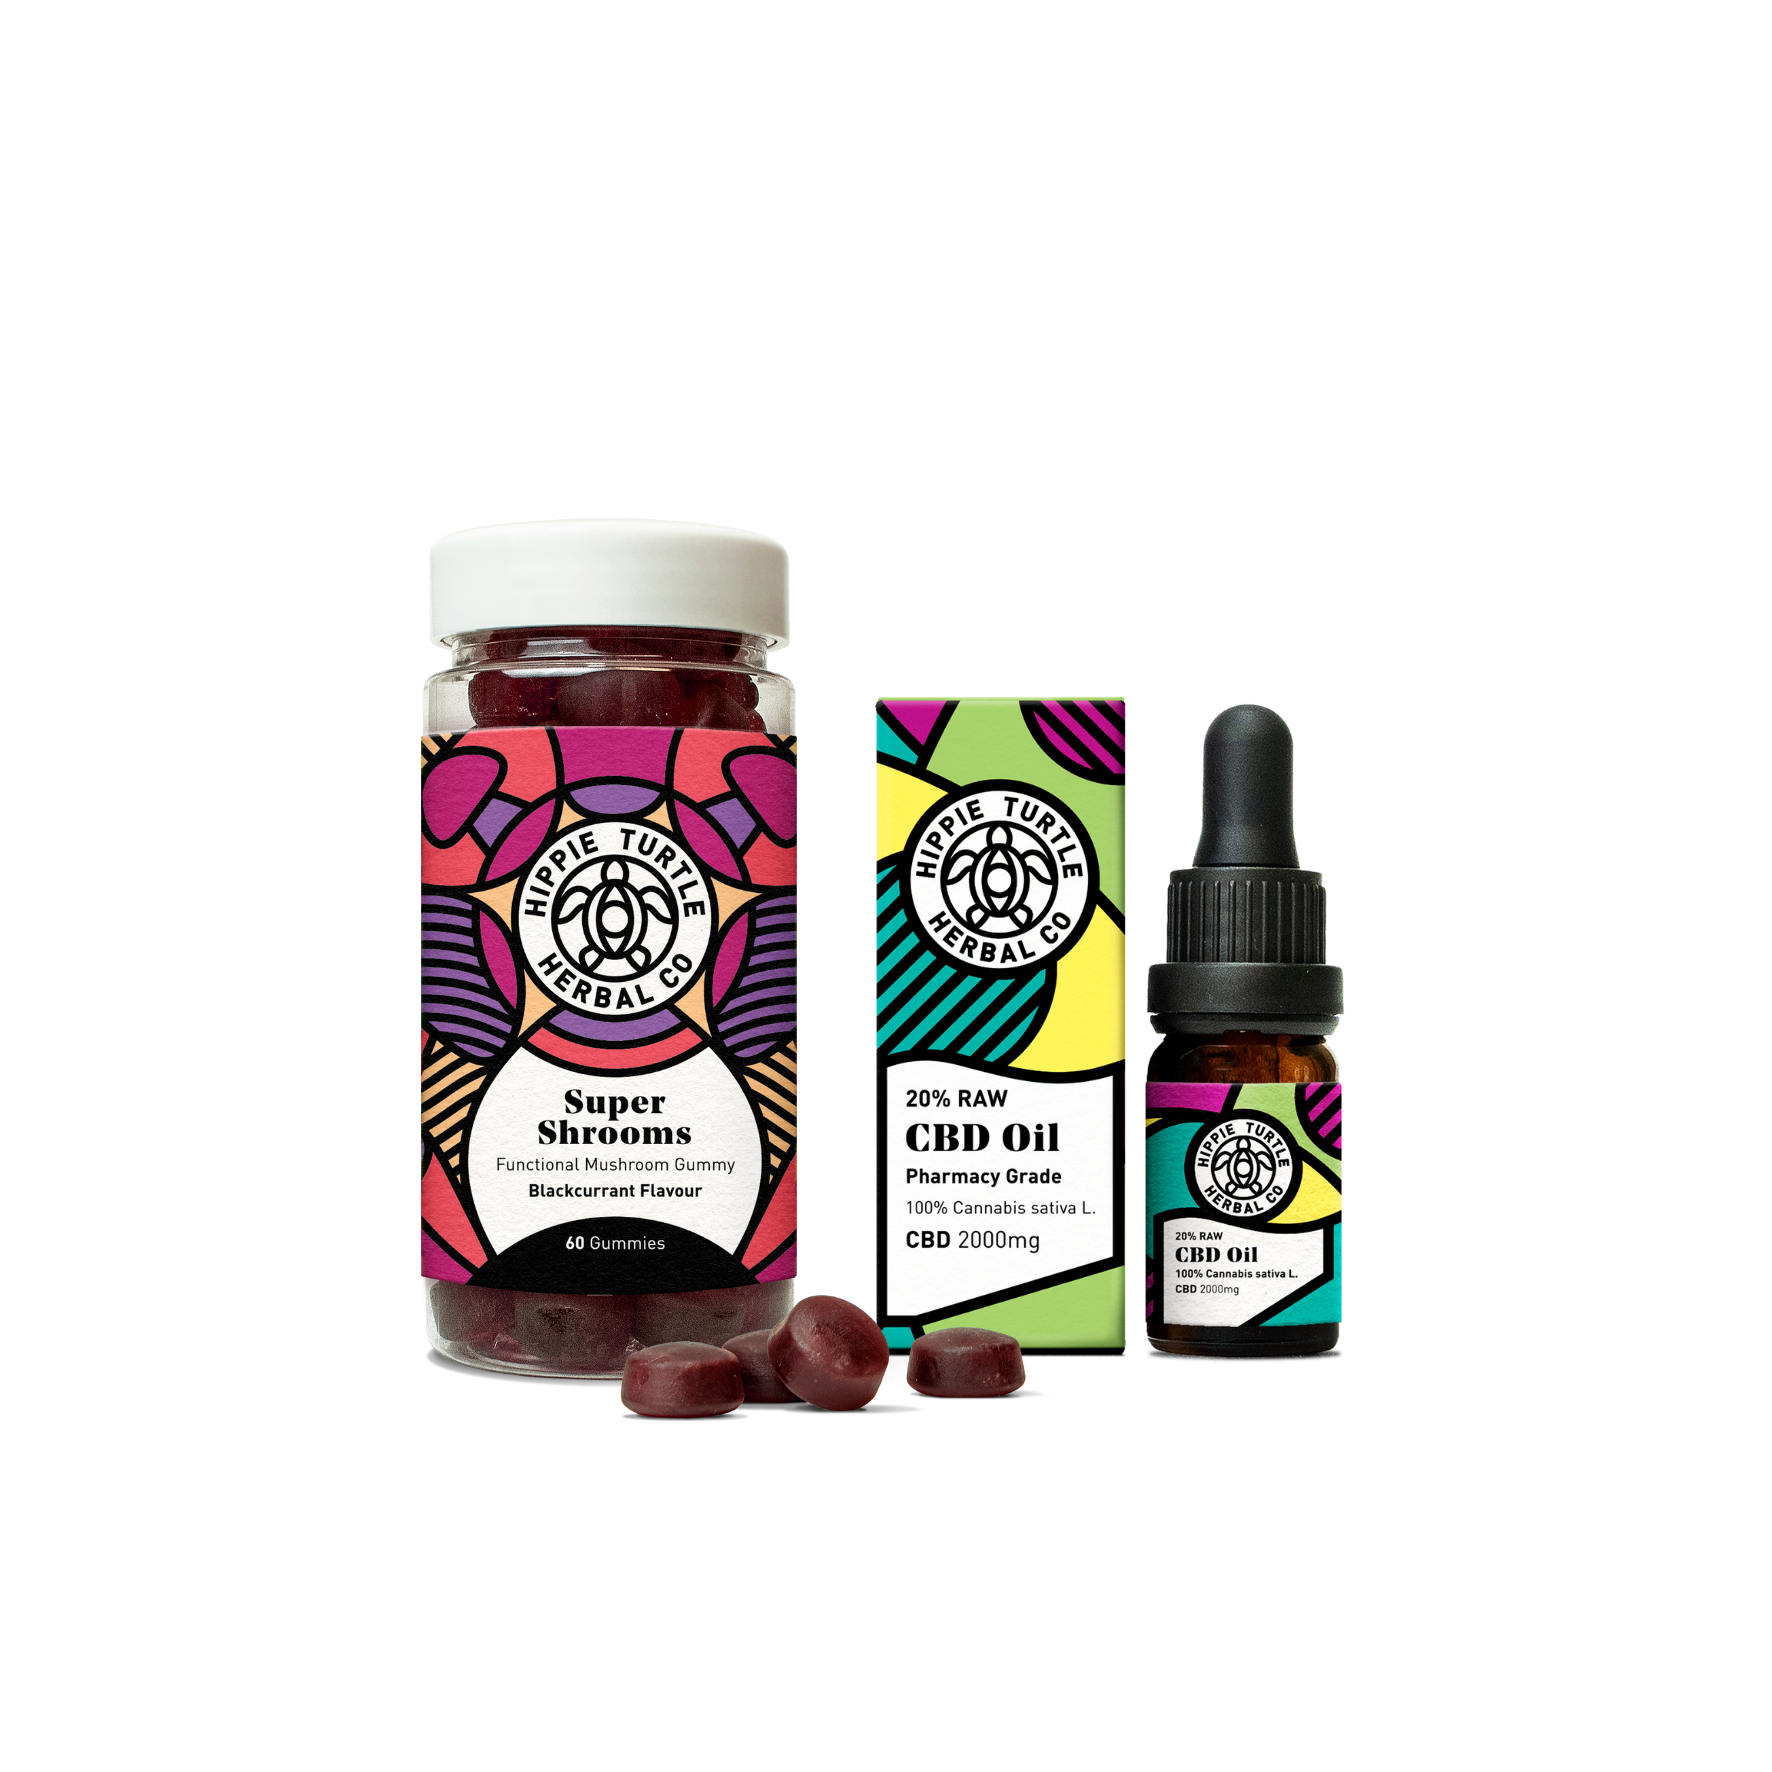 Harmony combo containing a bundle ofsuper shrooms functional mushroom gummies with ginseng & b5, and premium pharmacy grade RAW 20% cbd oil 